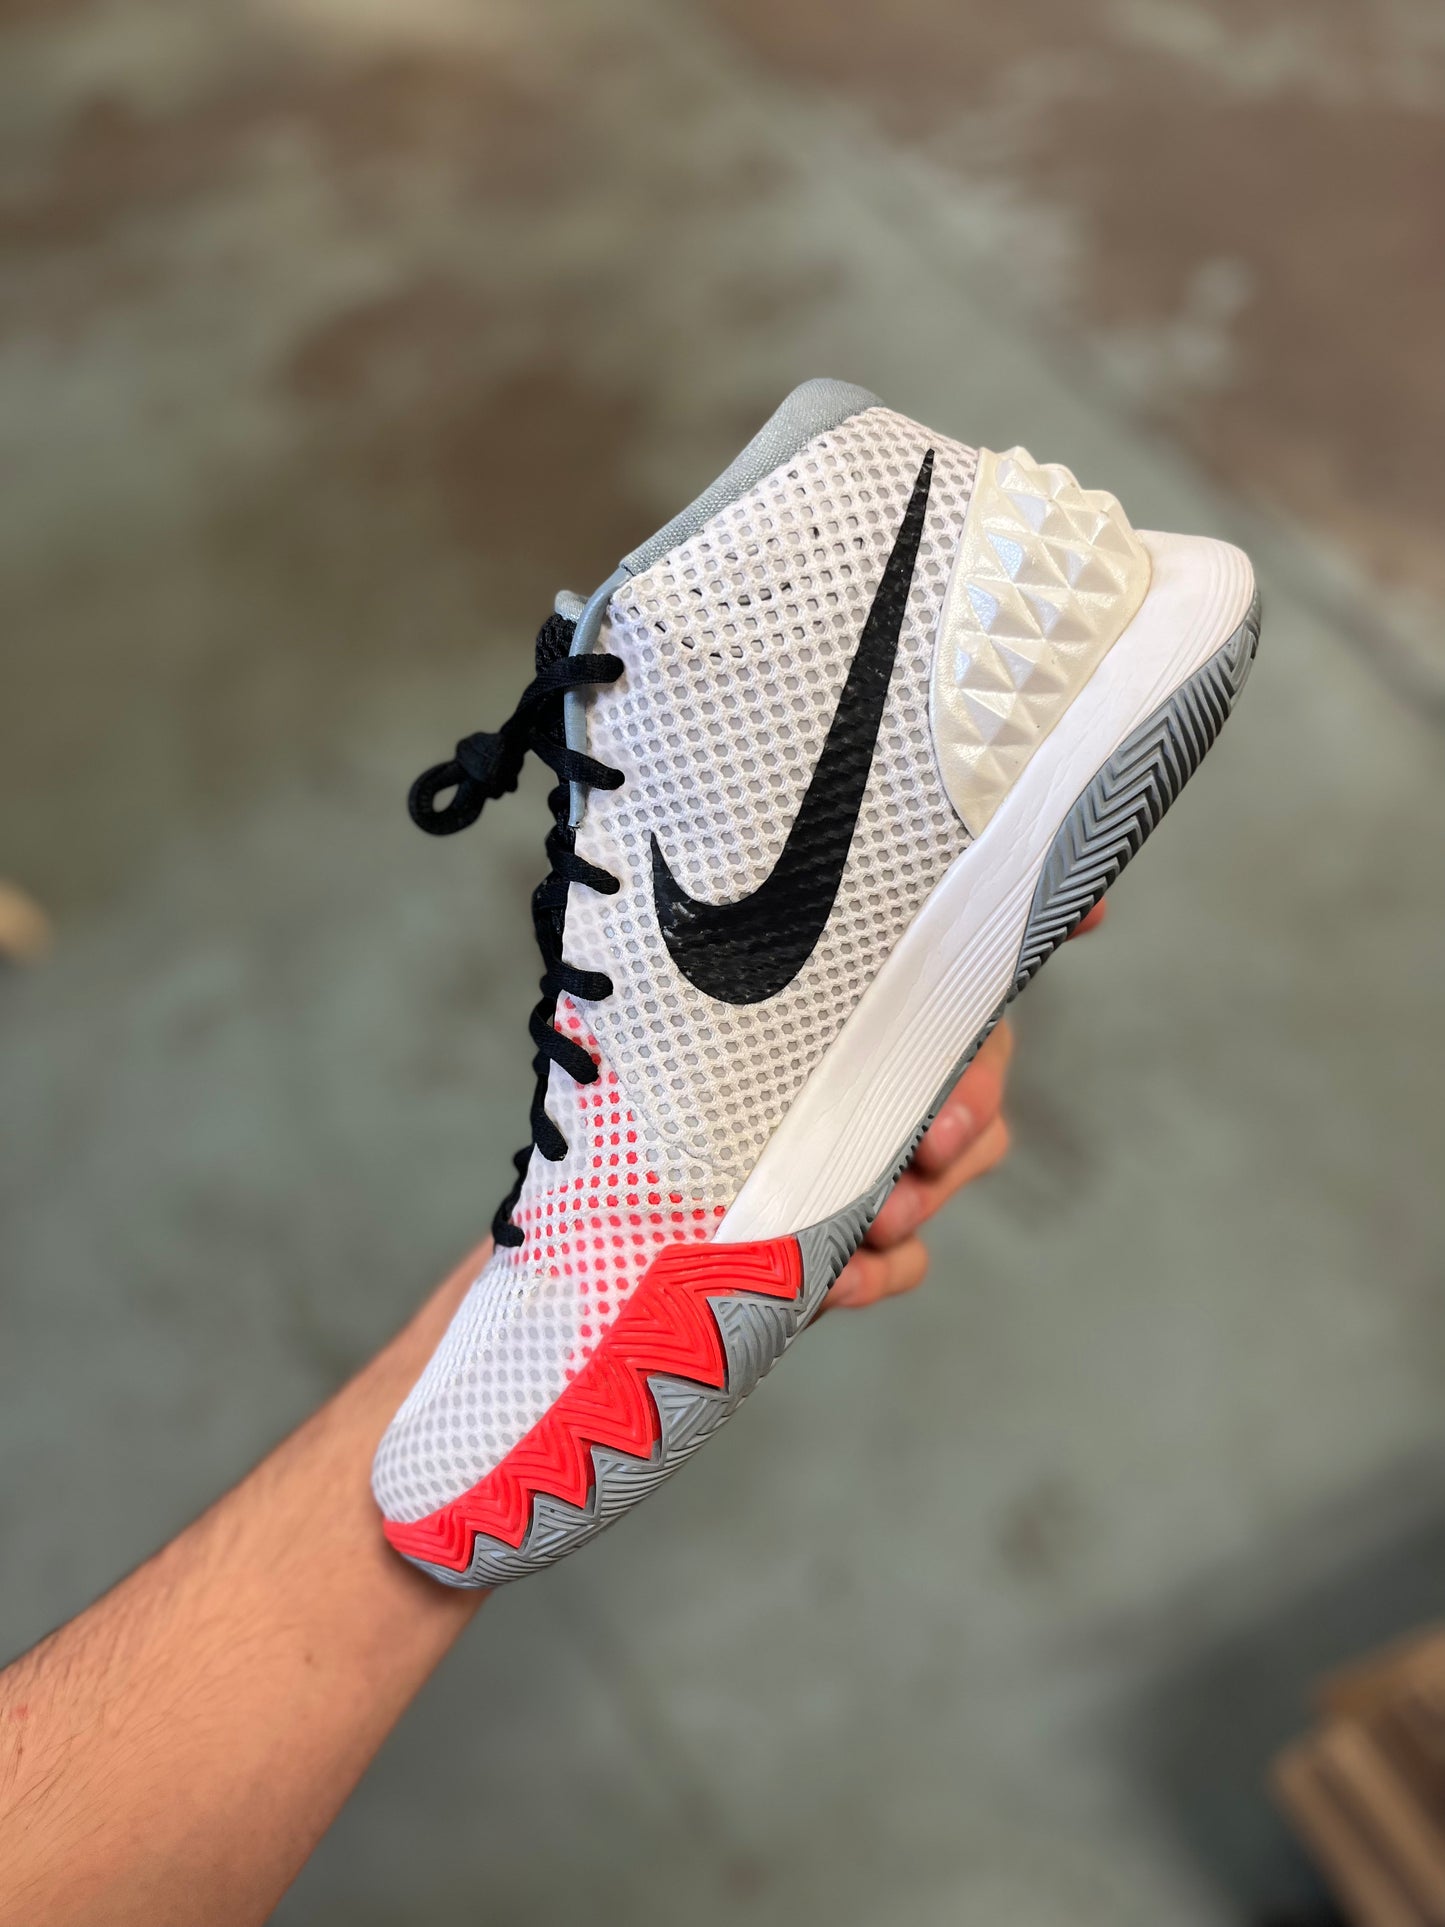 Kyrie 1 ‘Infared’ (size 9.5)